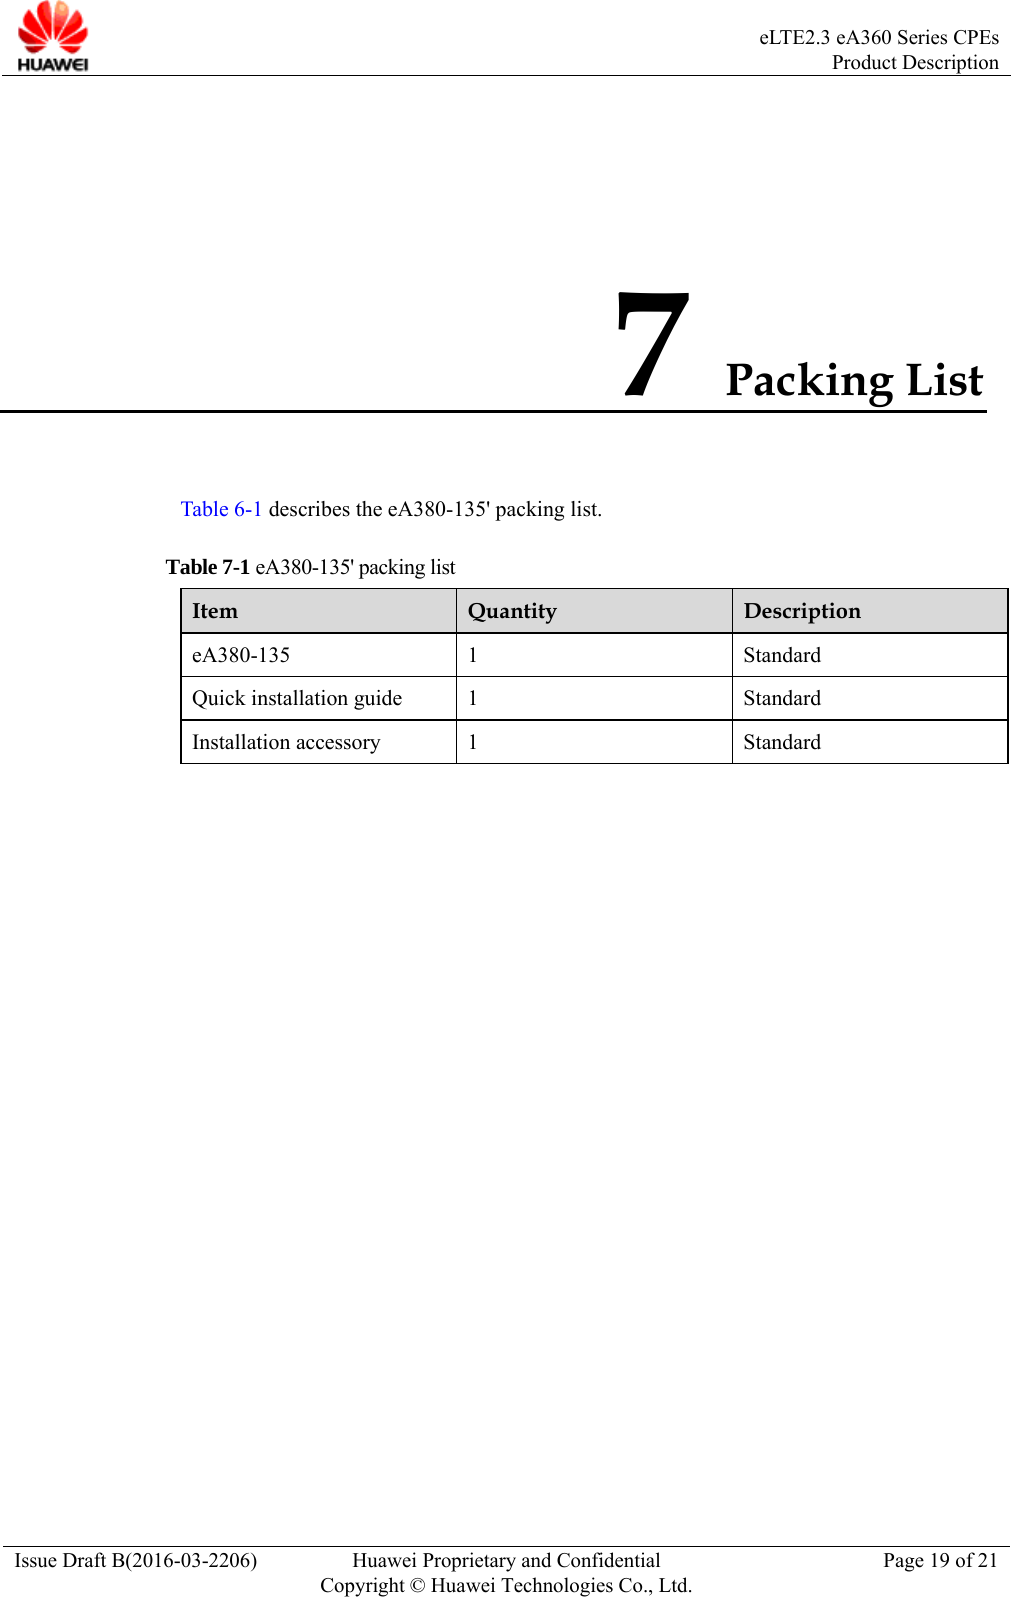  eLTE2.3 eA360 Series CPEsProduct Description Issue Draft B(2016-03-2206)  Huawei Proprietary and Confidential Copyright © Huawei Technologies Co., Ltd.Page 19 of 21 7 Packing List Table 6-1 describes the eA380-135&apos; packing list. Table 7-1 eA380-135&apos; packing list Item  Quantity  Description eA380-135 1  Standard Quick installation guide  1  Standard Installation accessory  1  Standard   